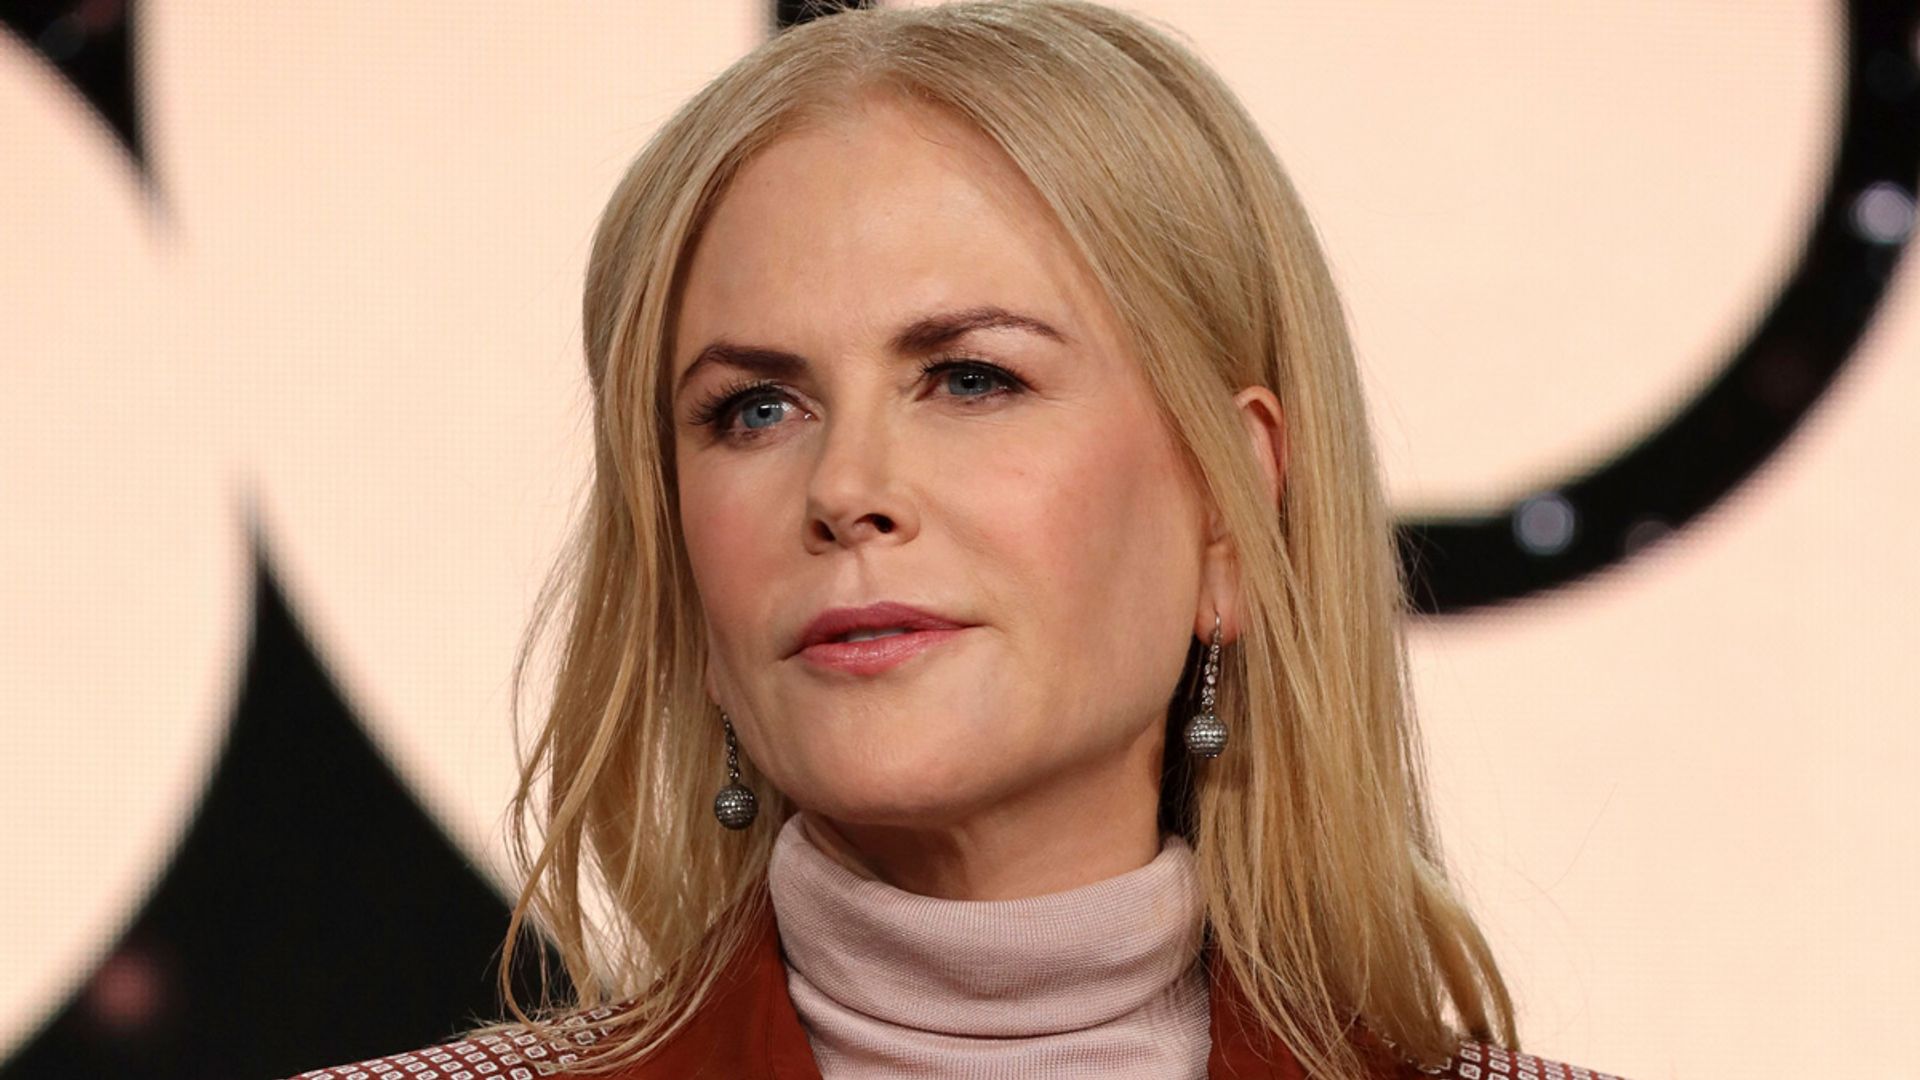 Nicole Kidman facing health setback after suffering painful injury: details